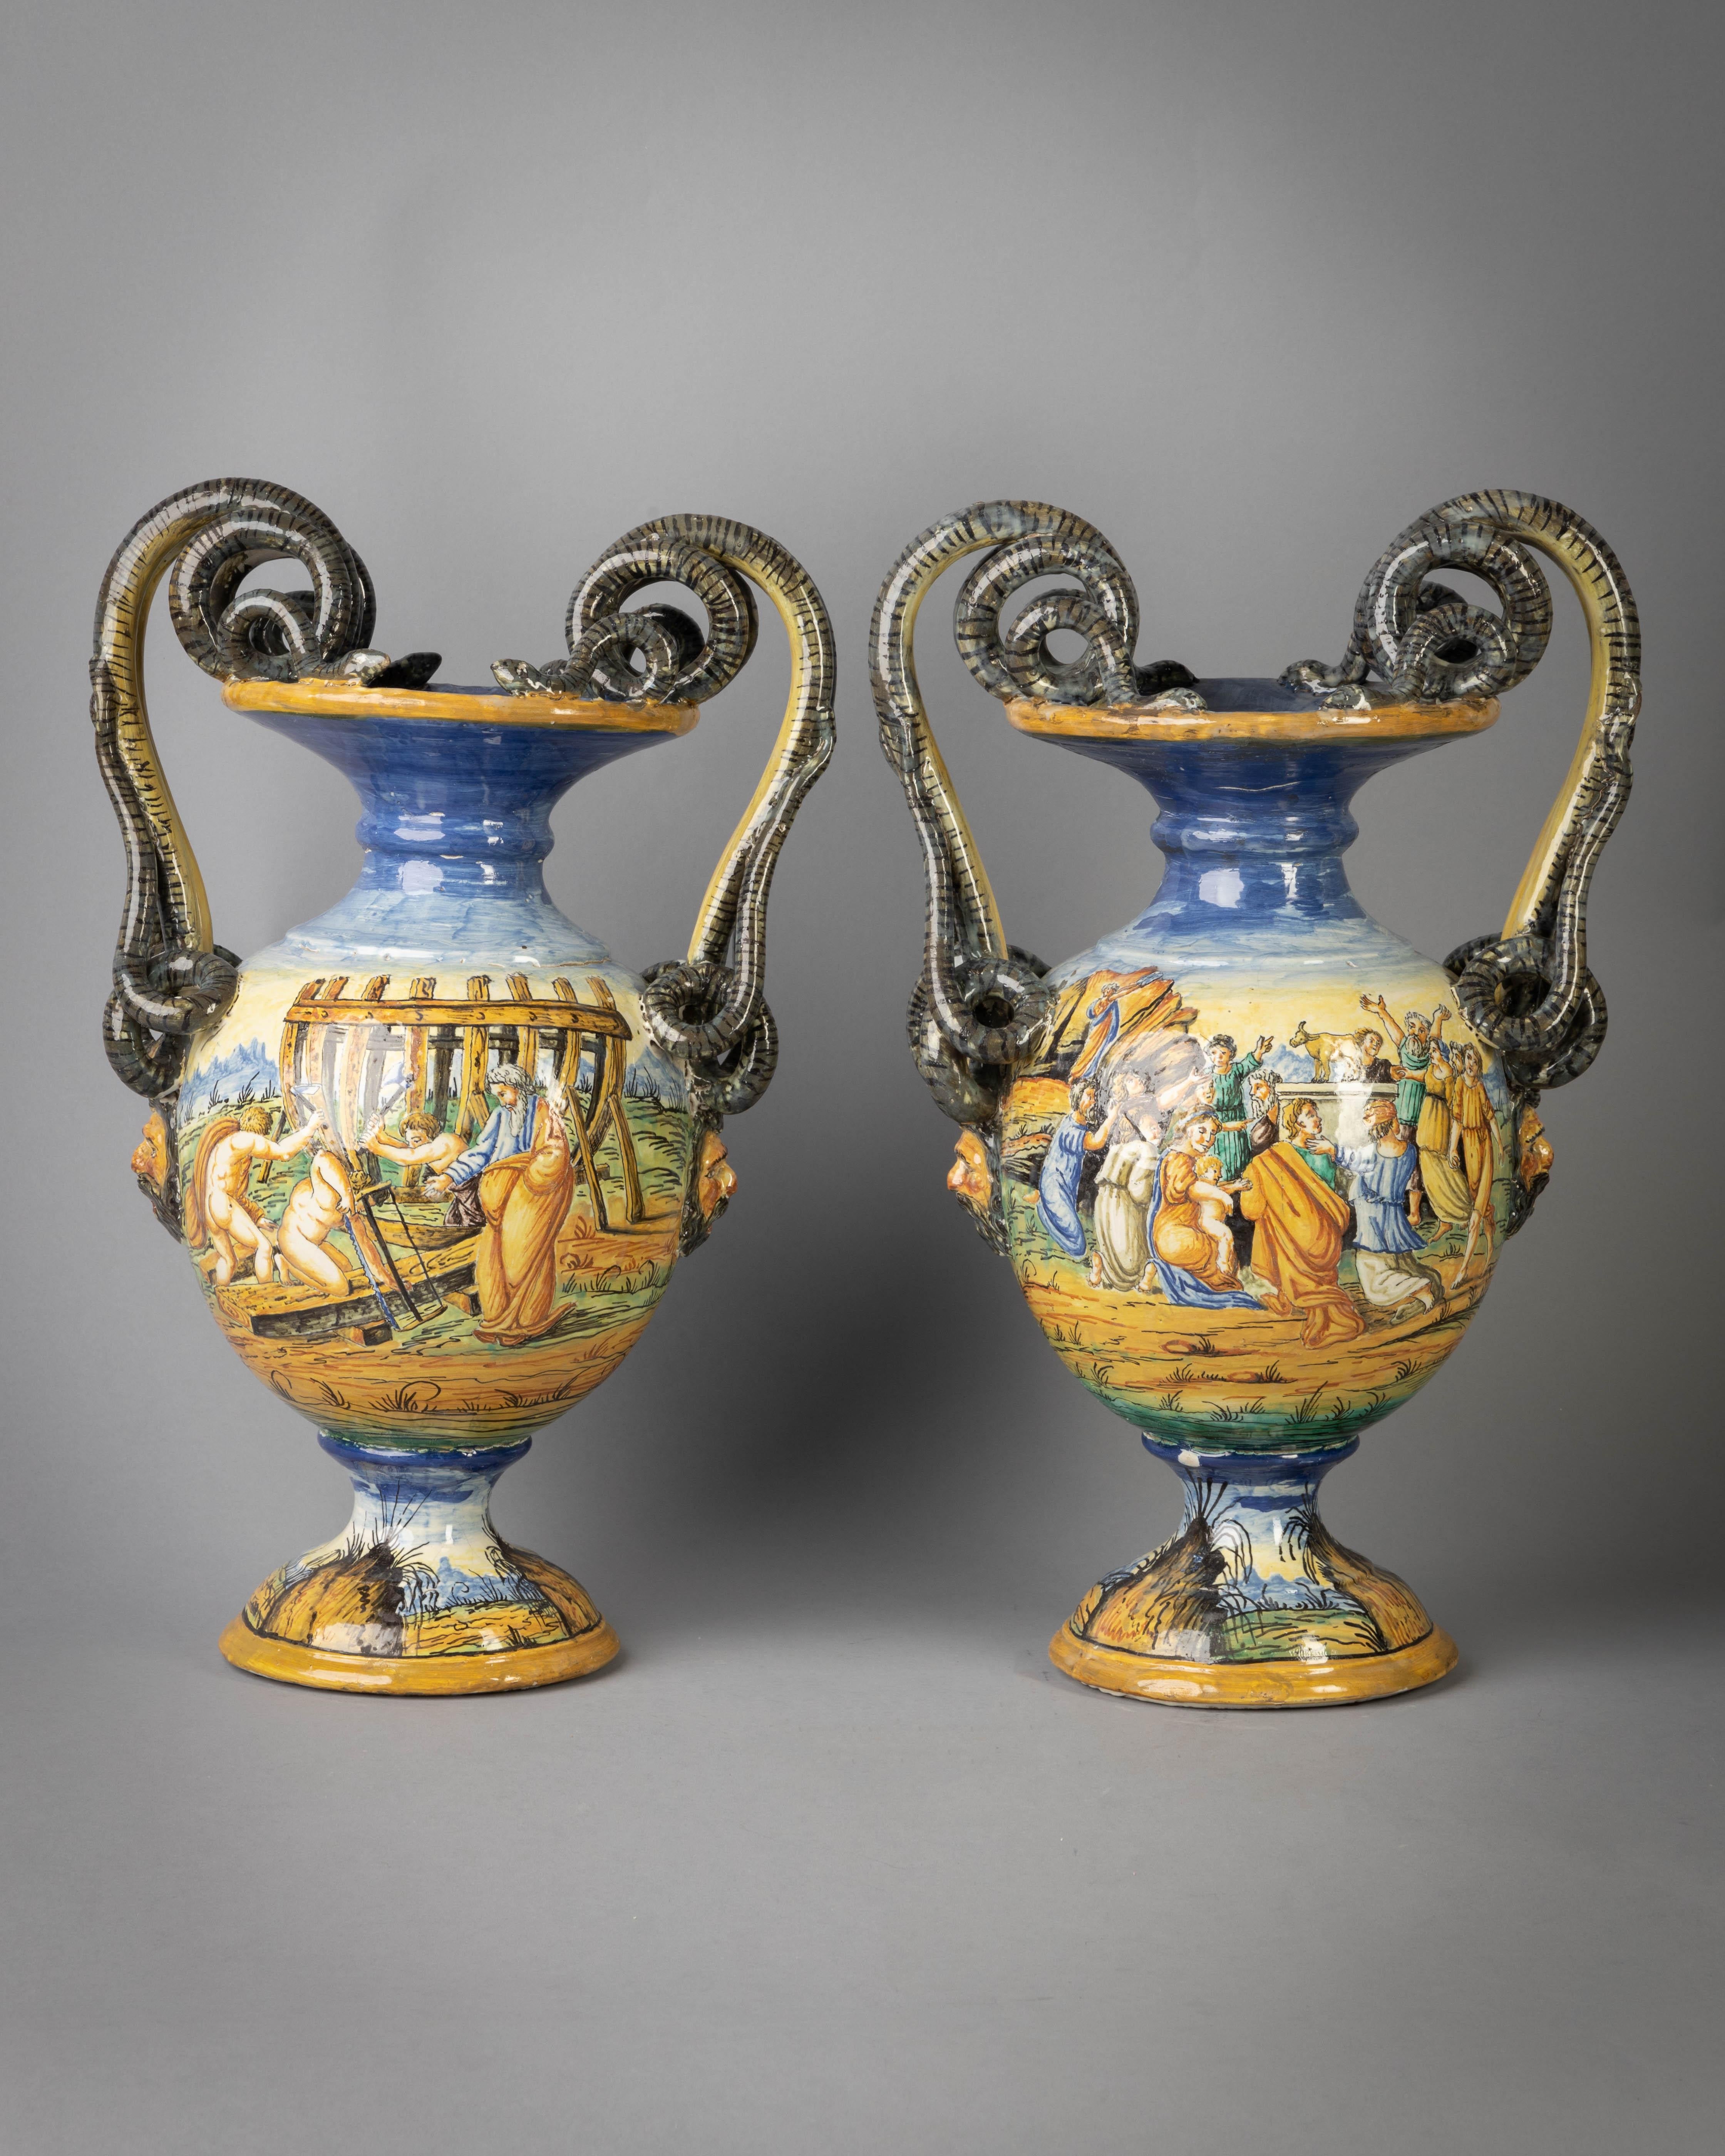 With entwined serpent handles, painted in colors on both sides of the bodies with biblical scenes.